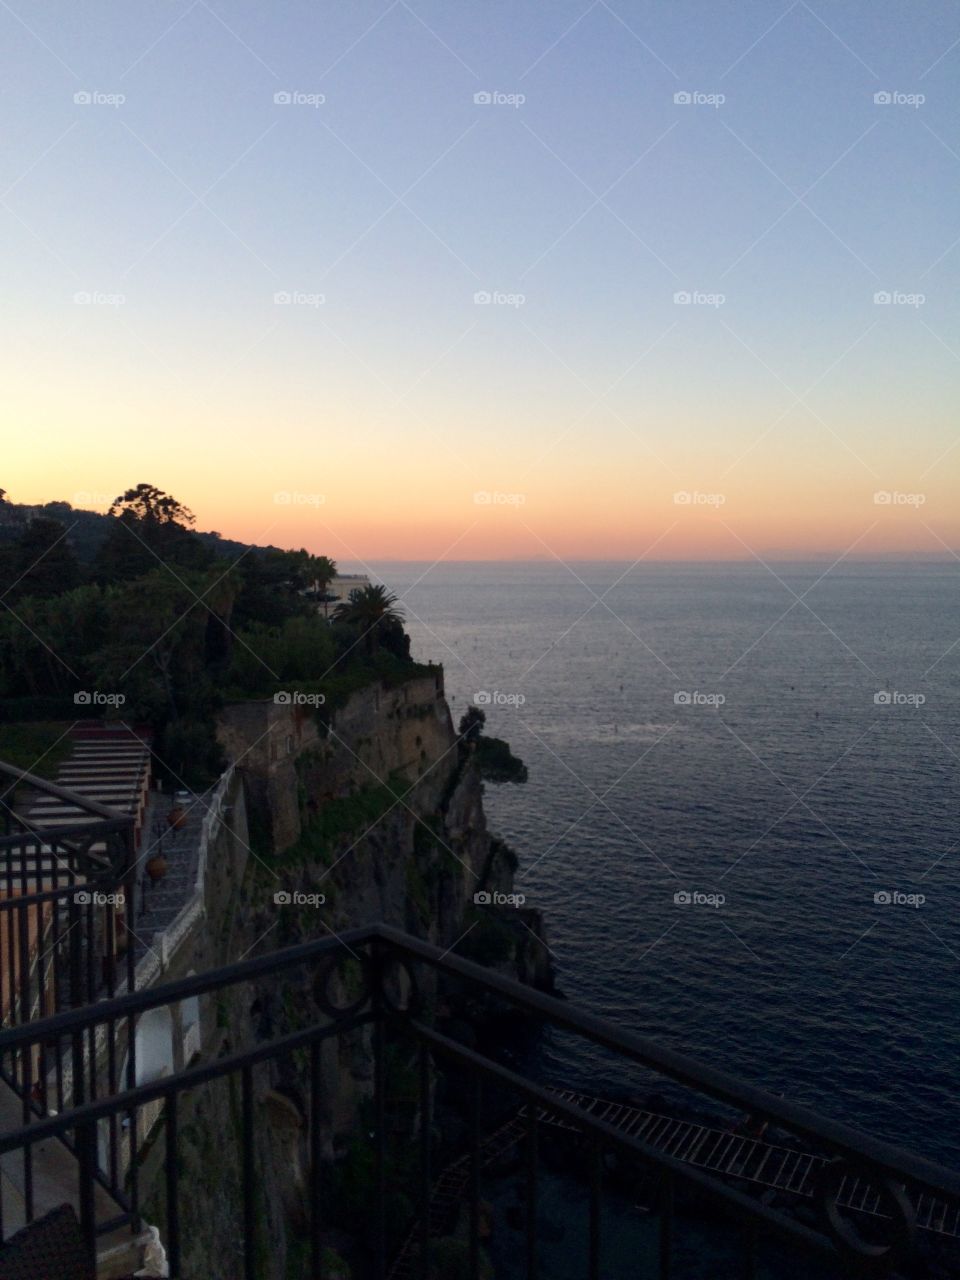 Sunset Beyond the Ruins. Taken from our balcony at Hotel Bellevue Syrene in Sorrento Italy. 